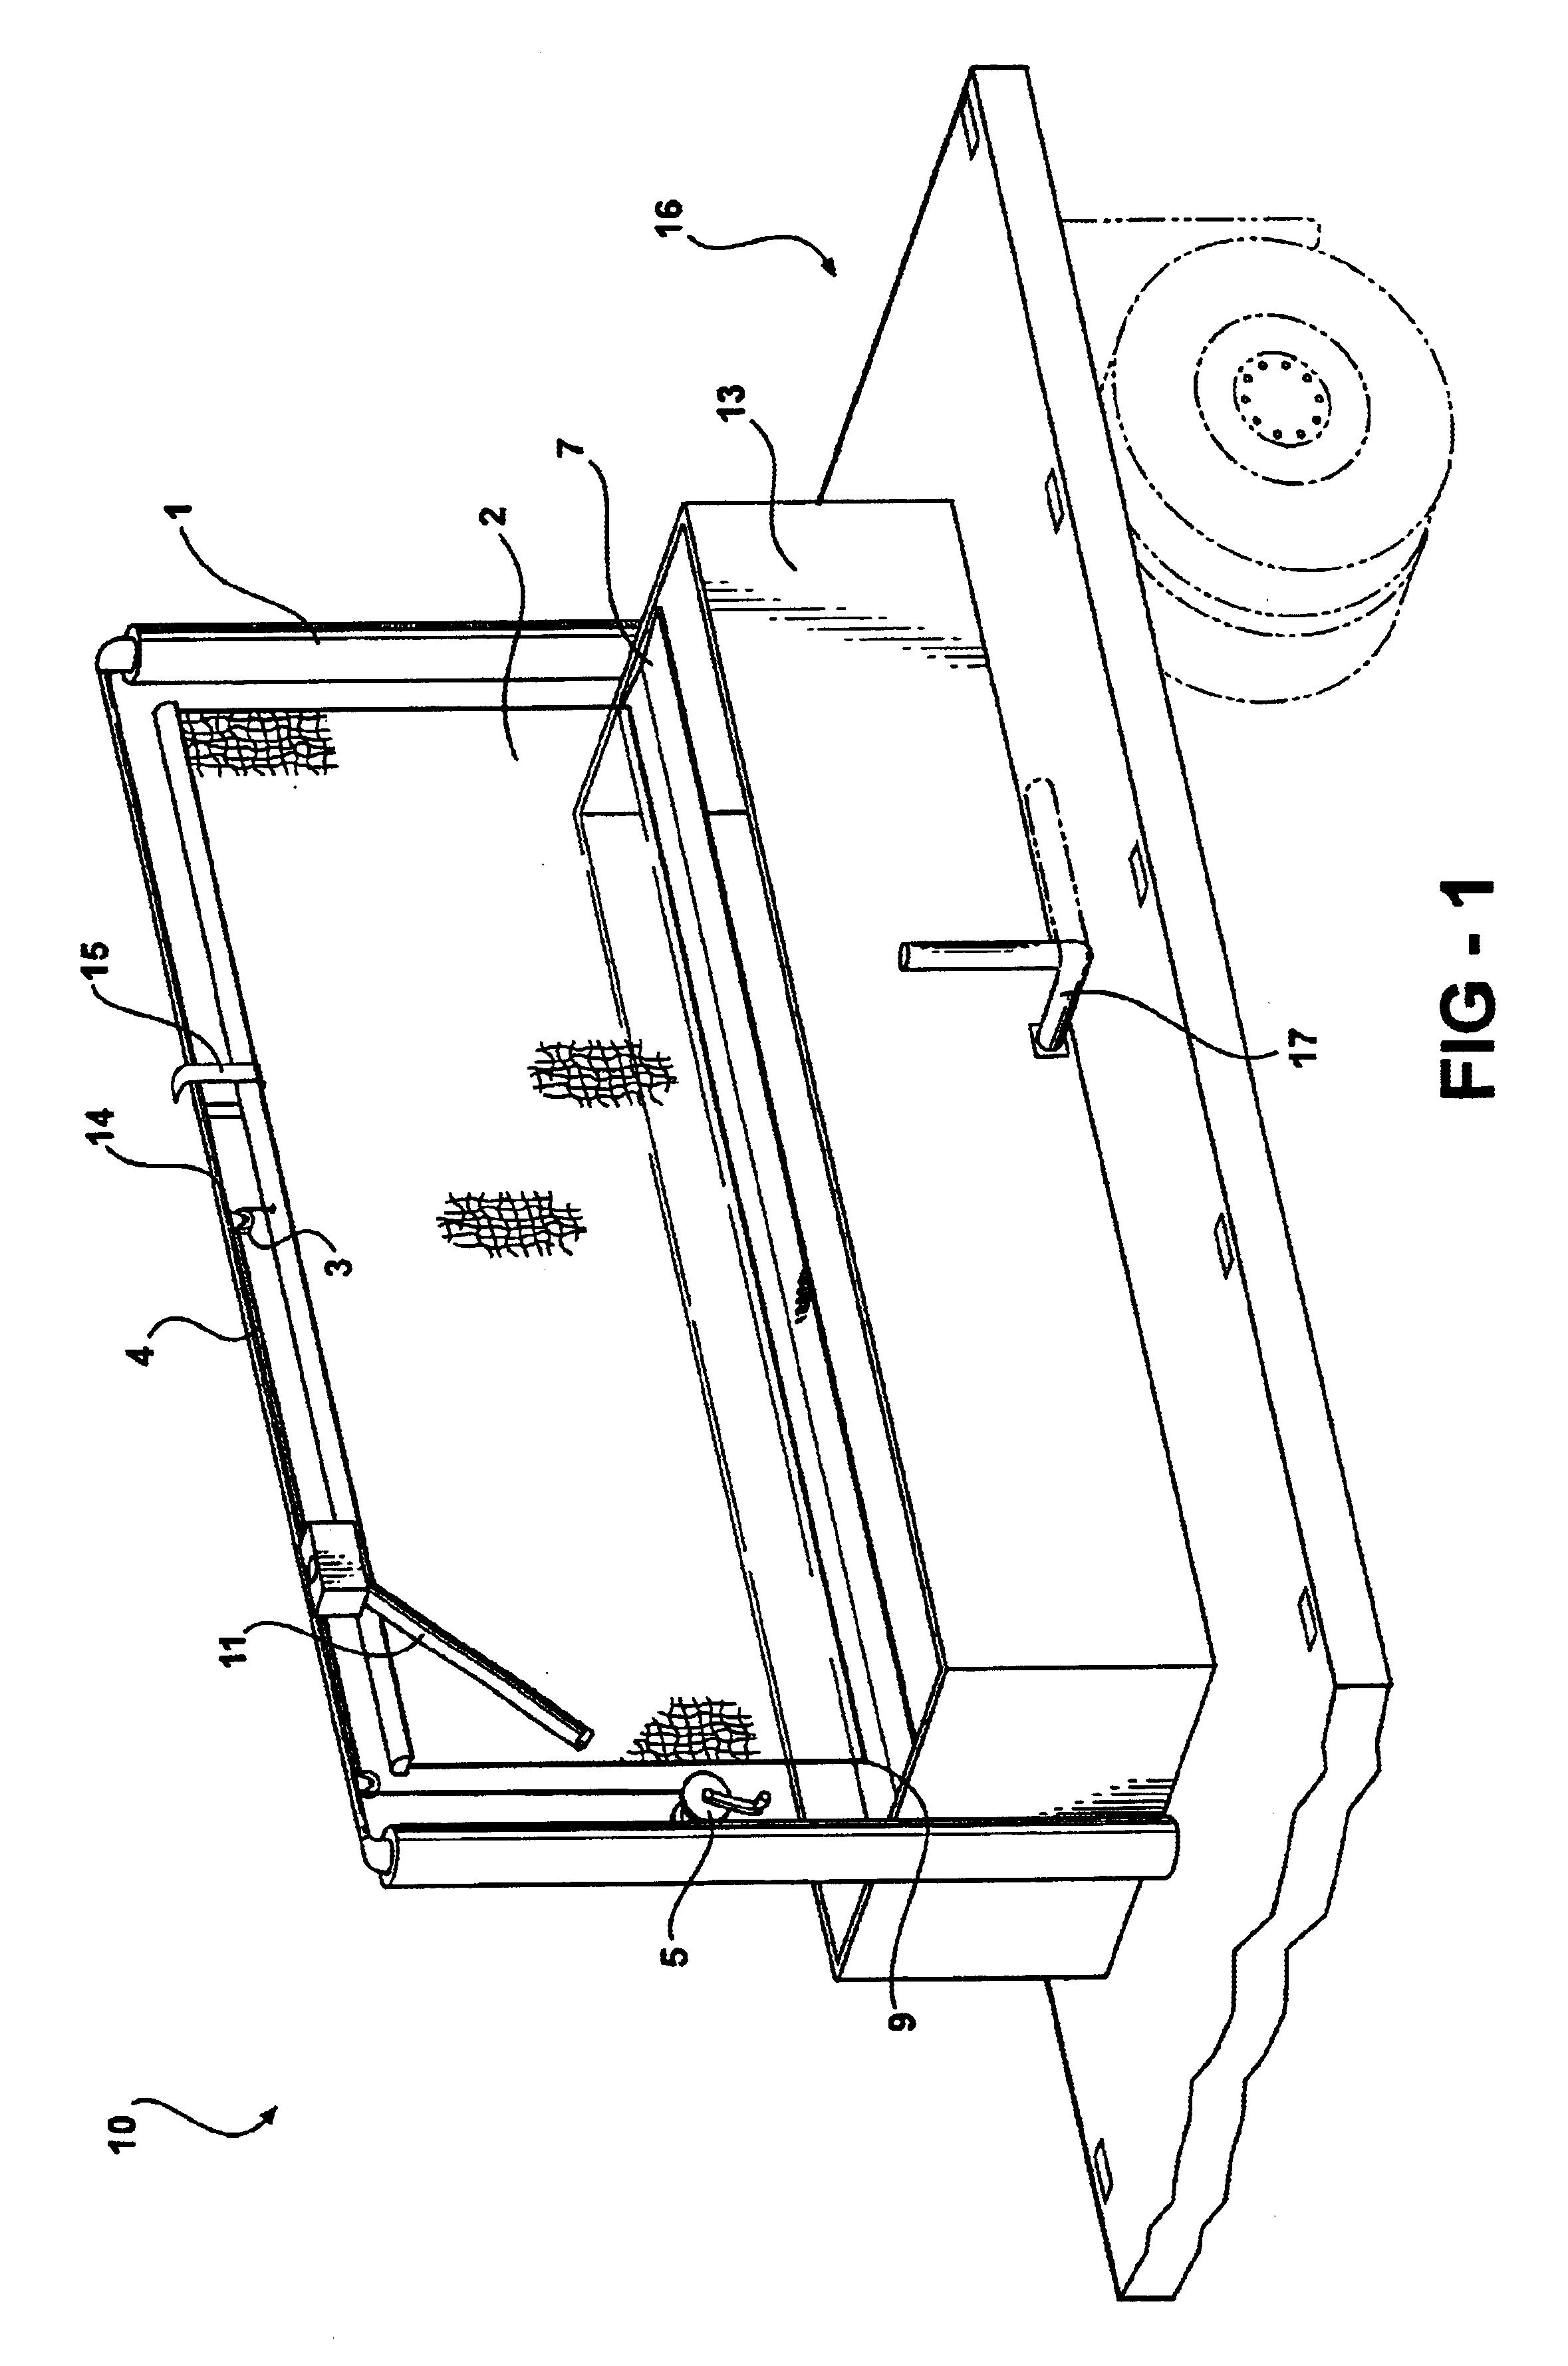 Atmospheric water absorption and retrieval device